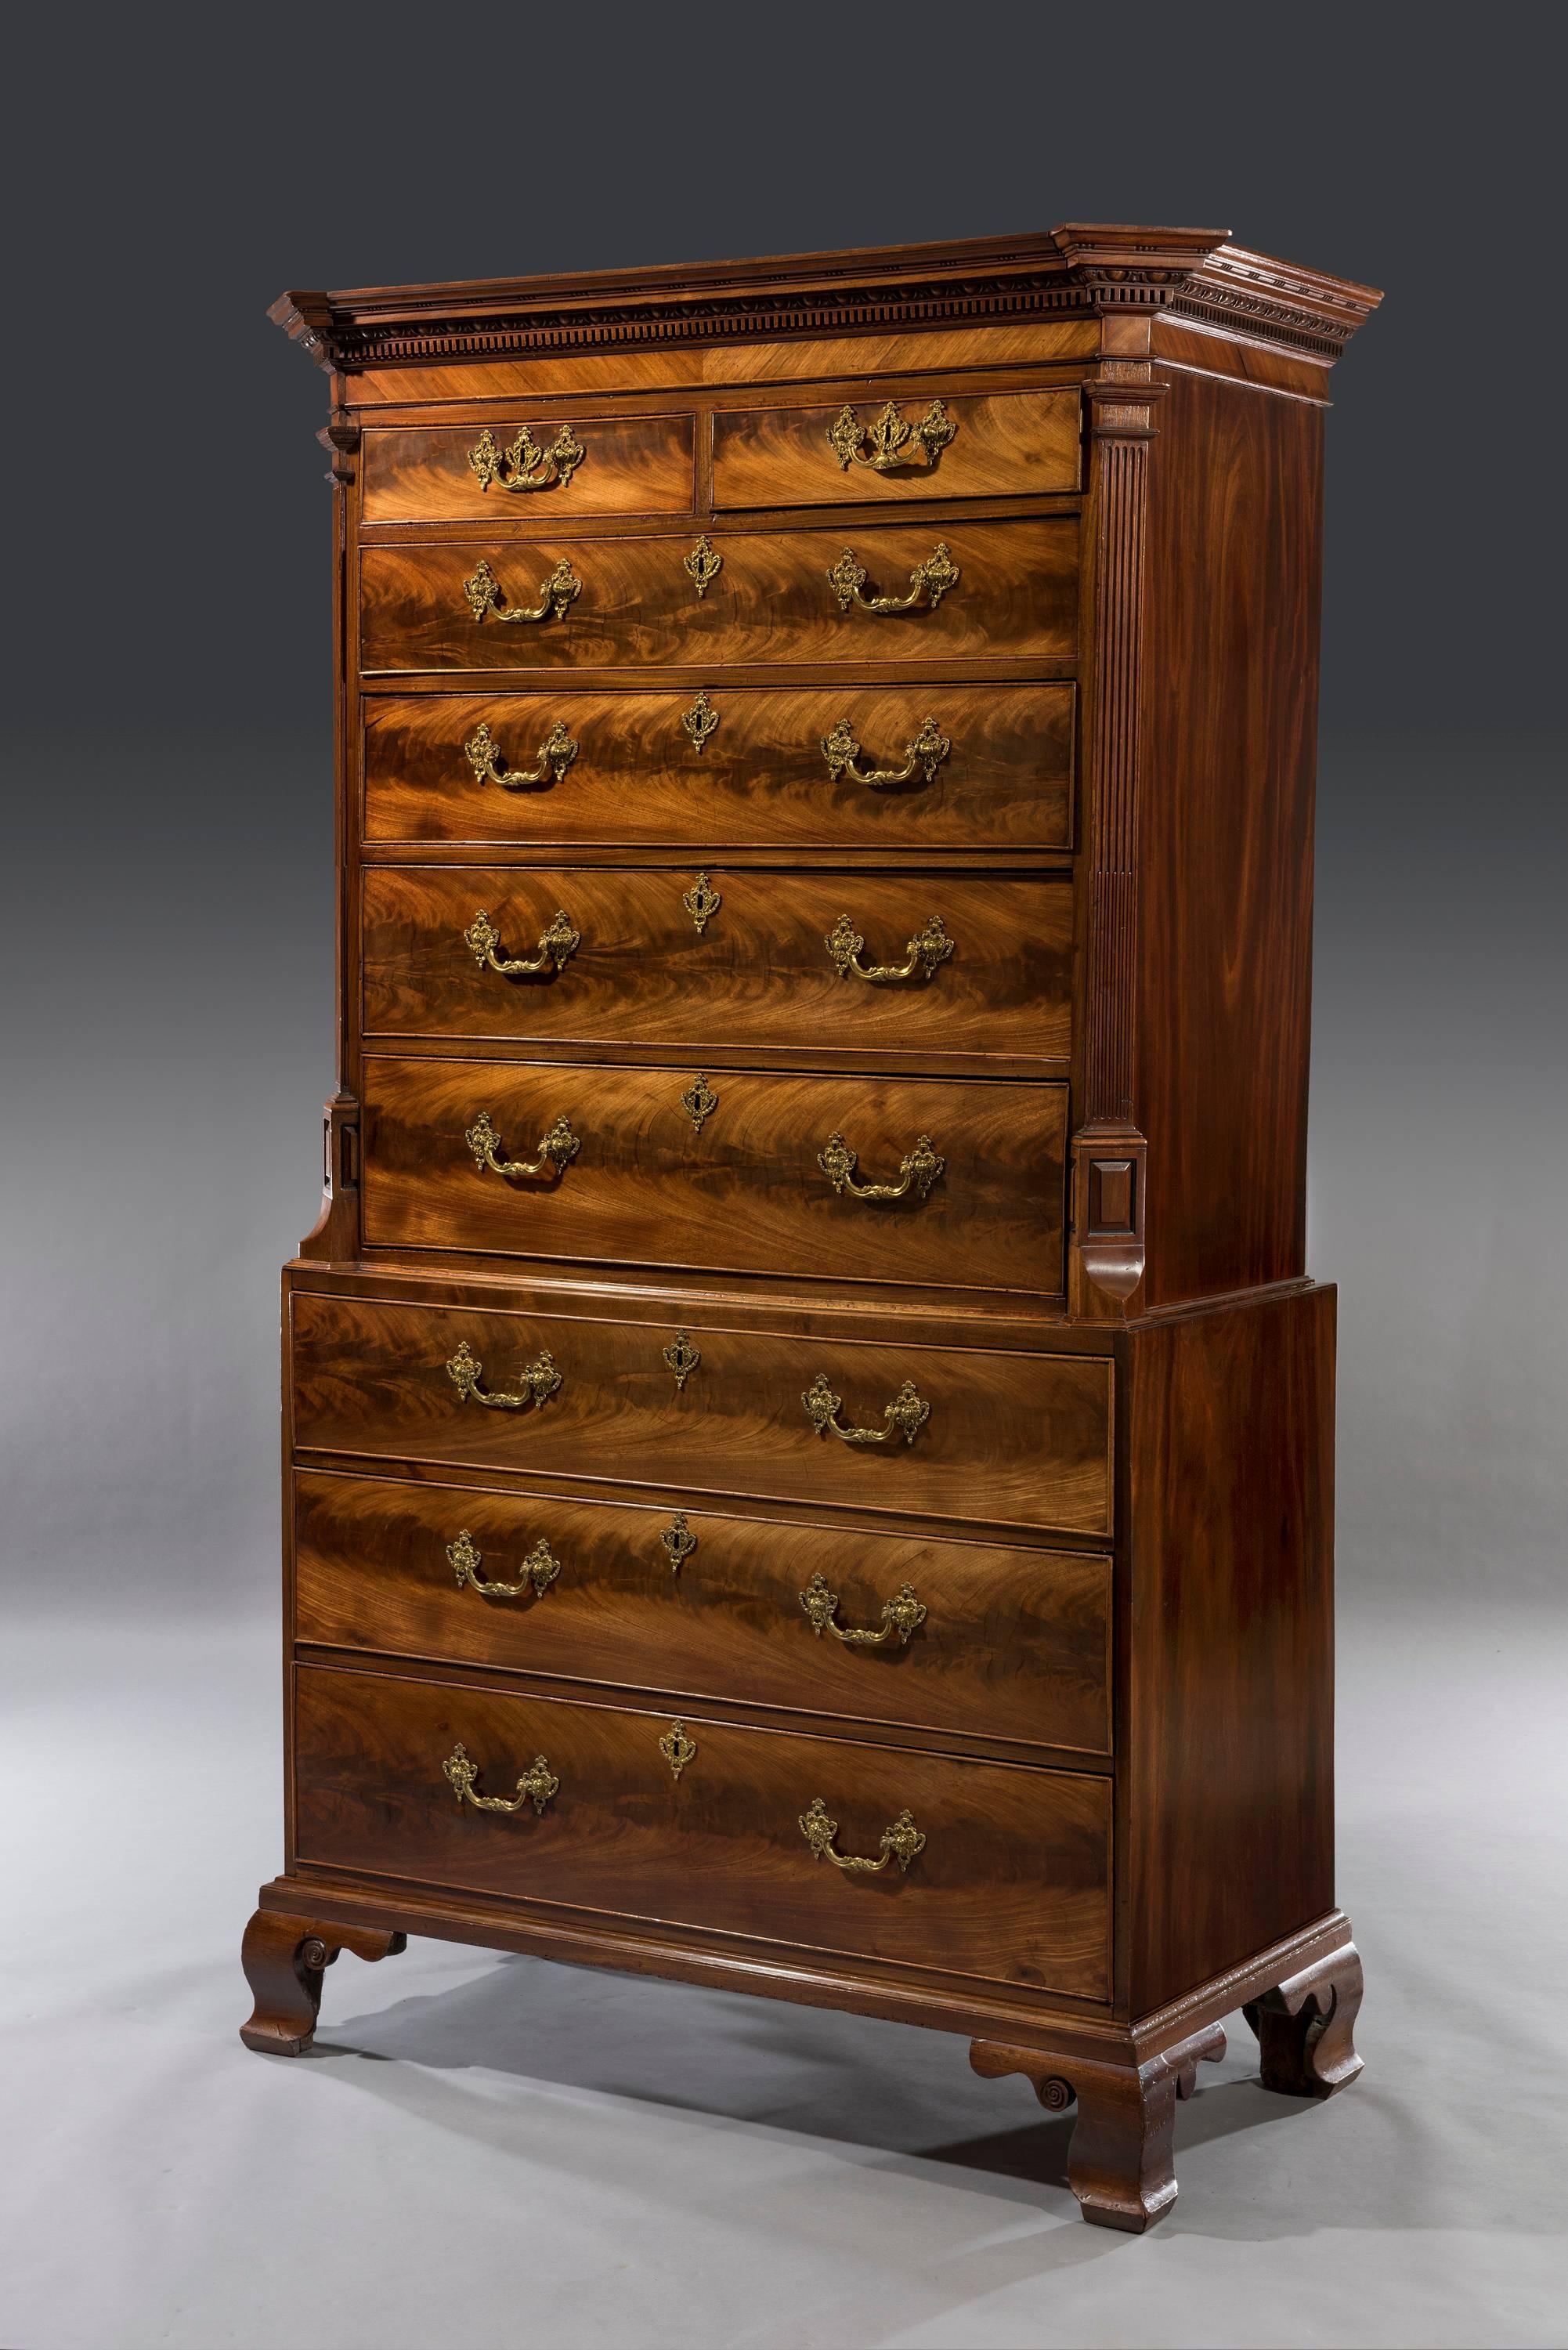 Chippendale Early George III 18th Century Period Carved Mahogany Chest on Chest For Sale